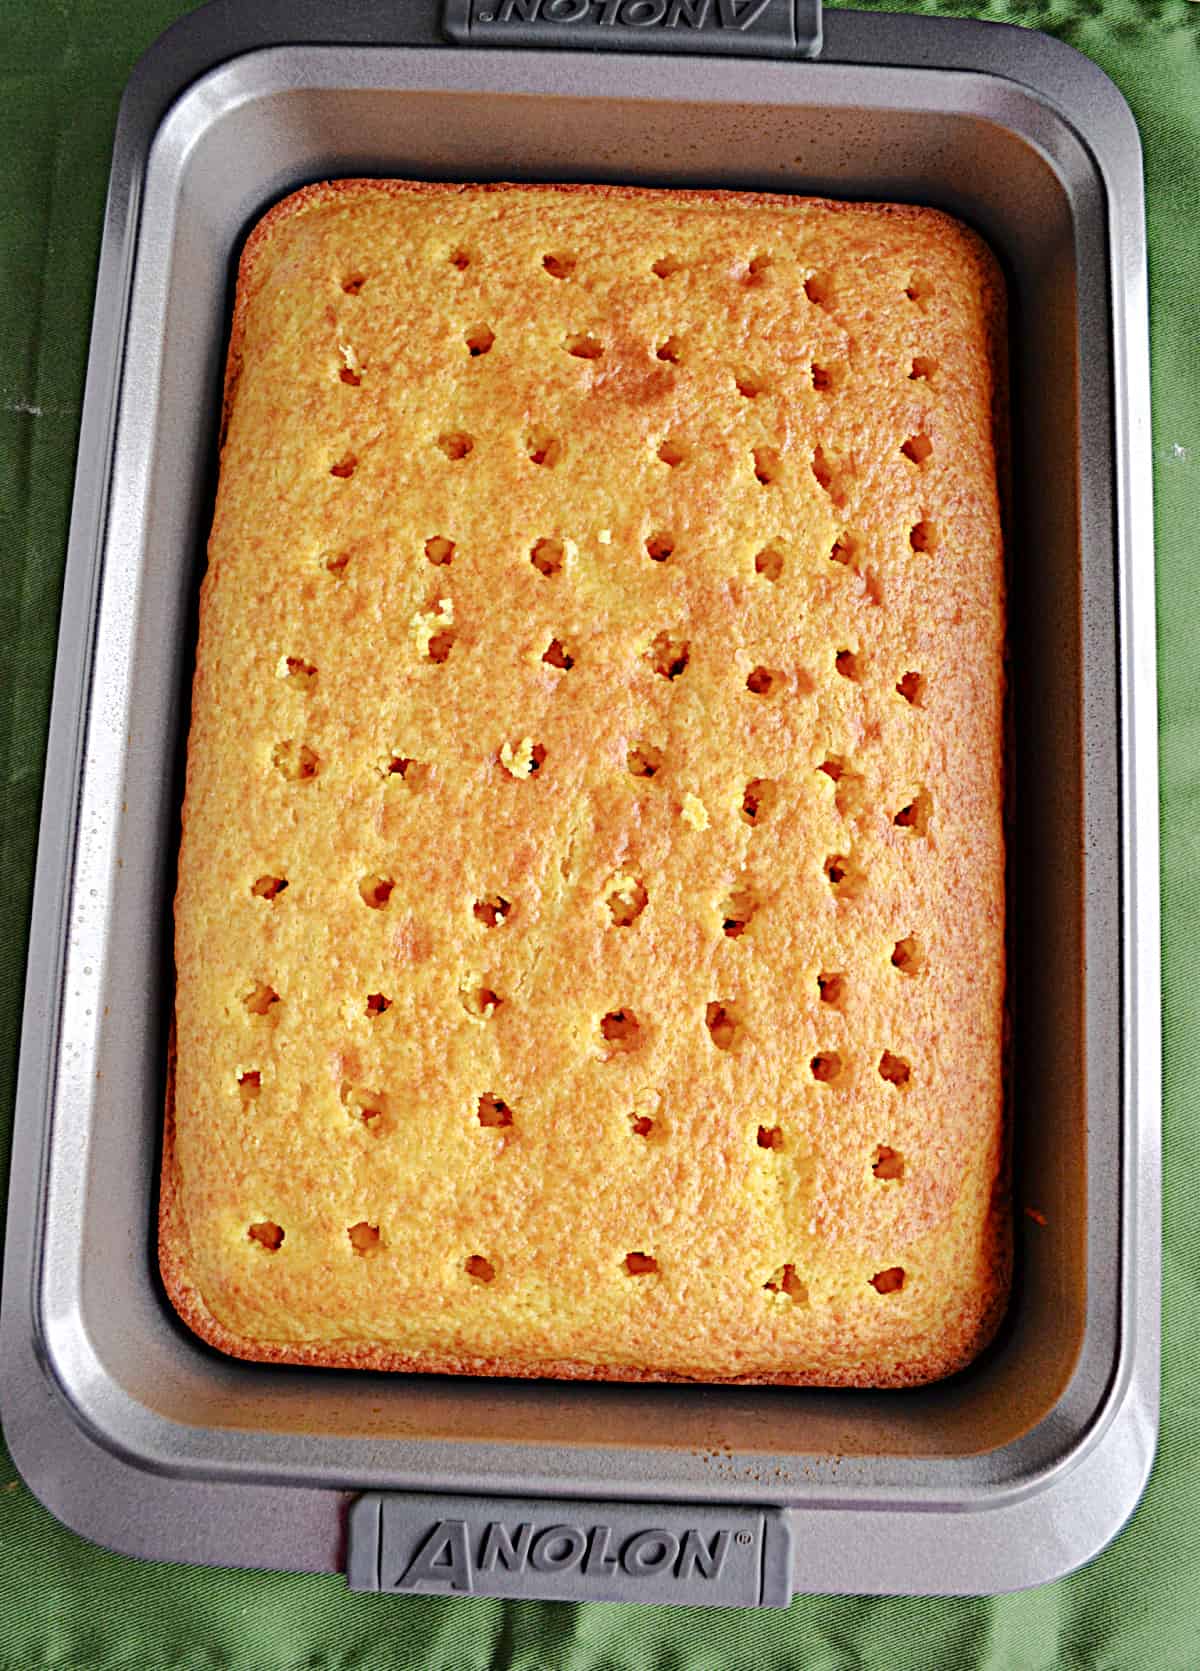 A cake with holes poked in it.